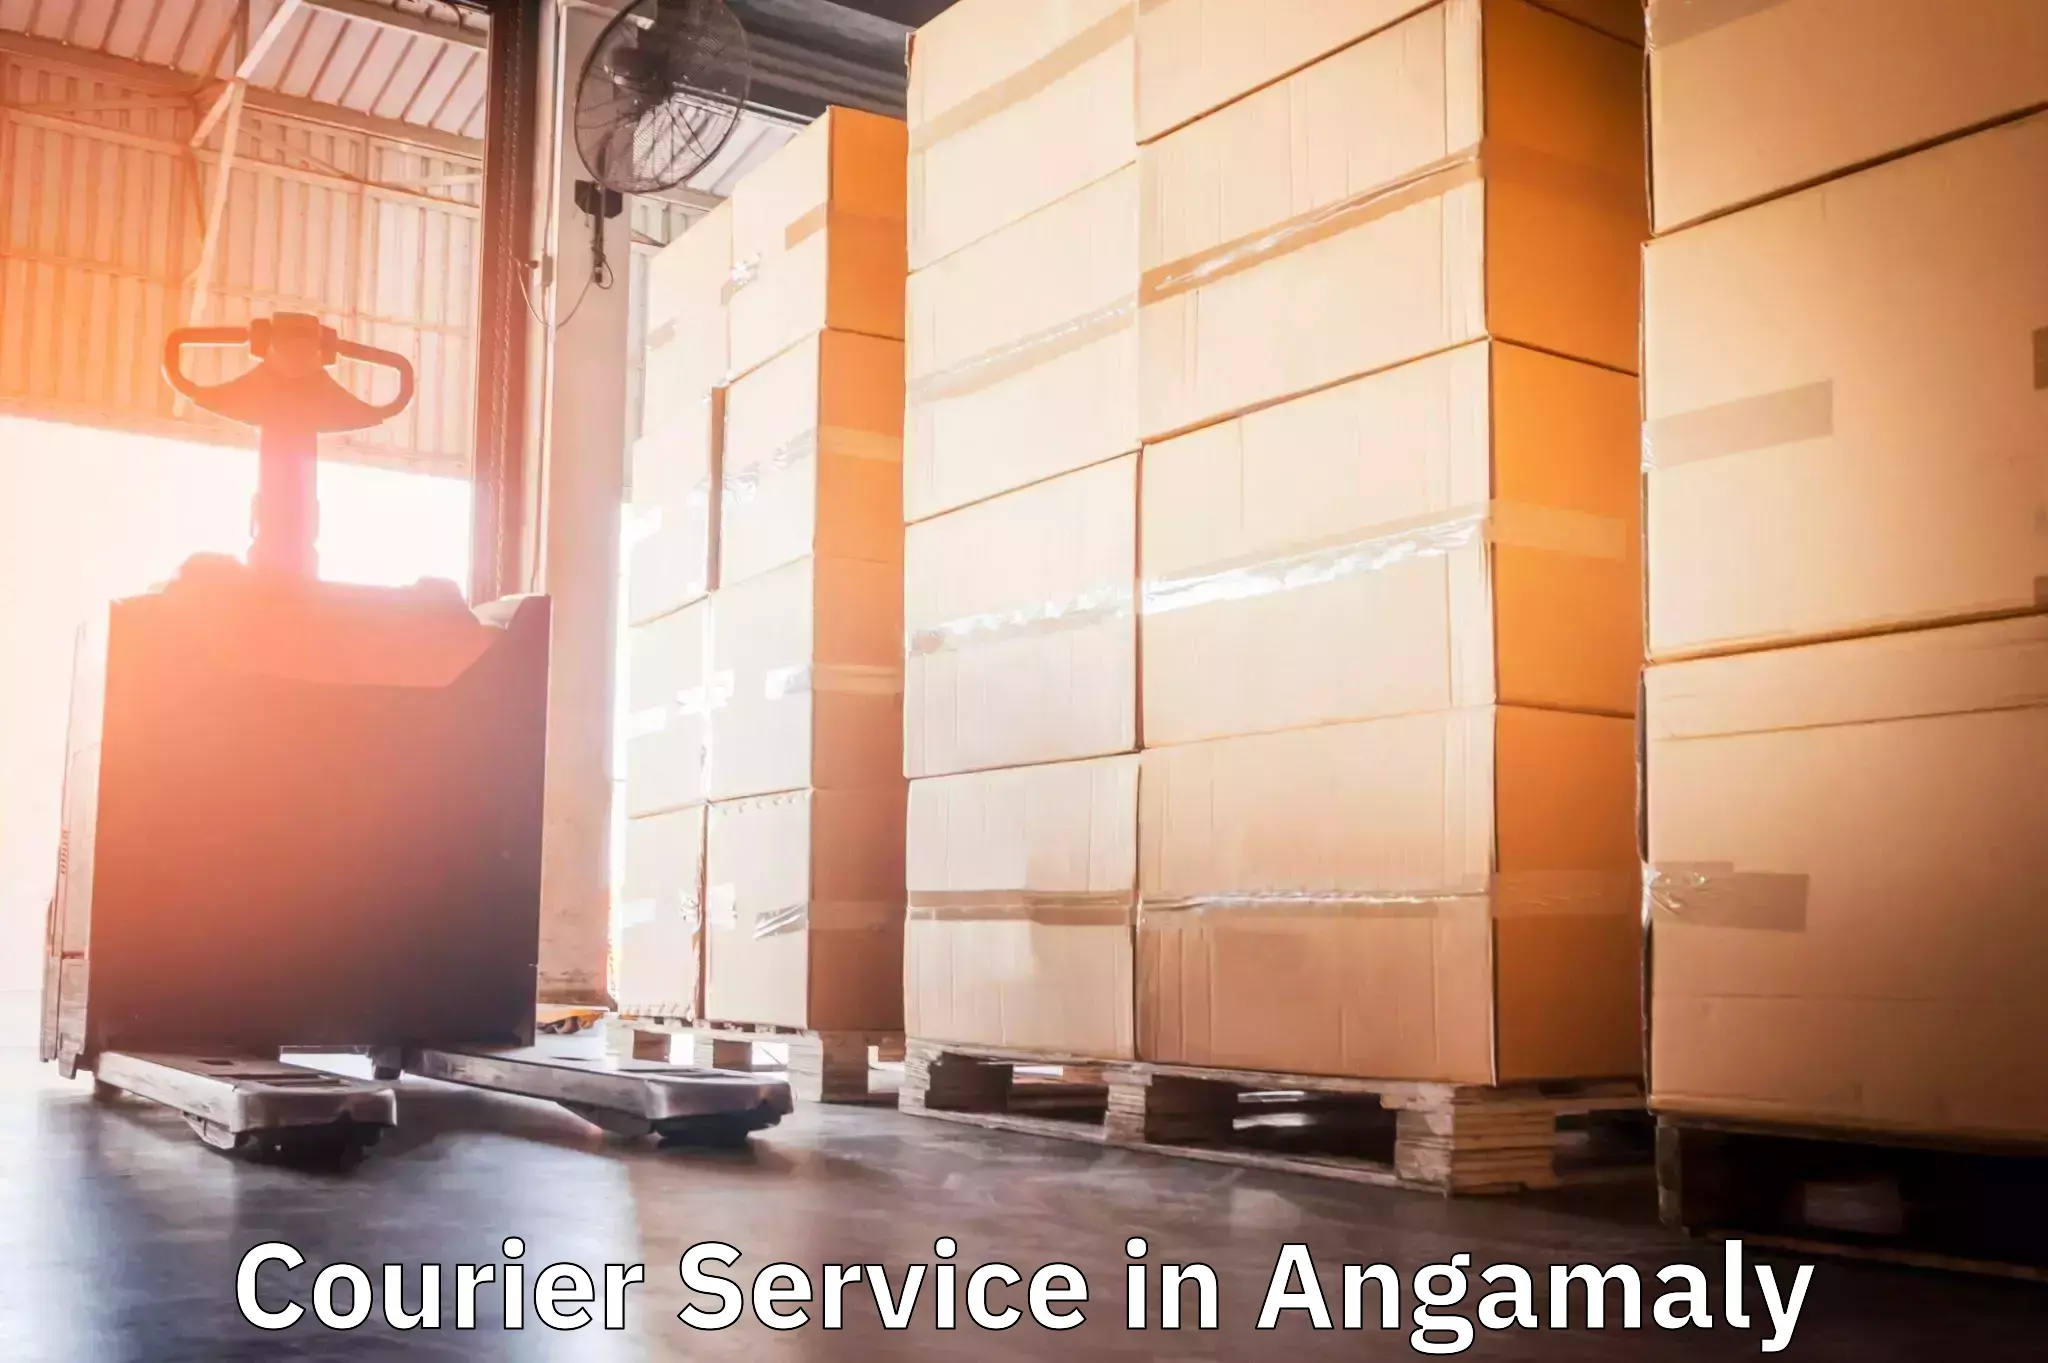 Logistics efficiency in Angamaly